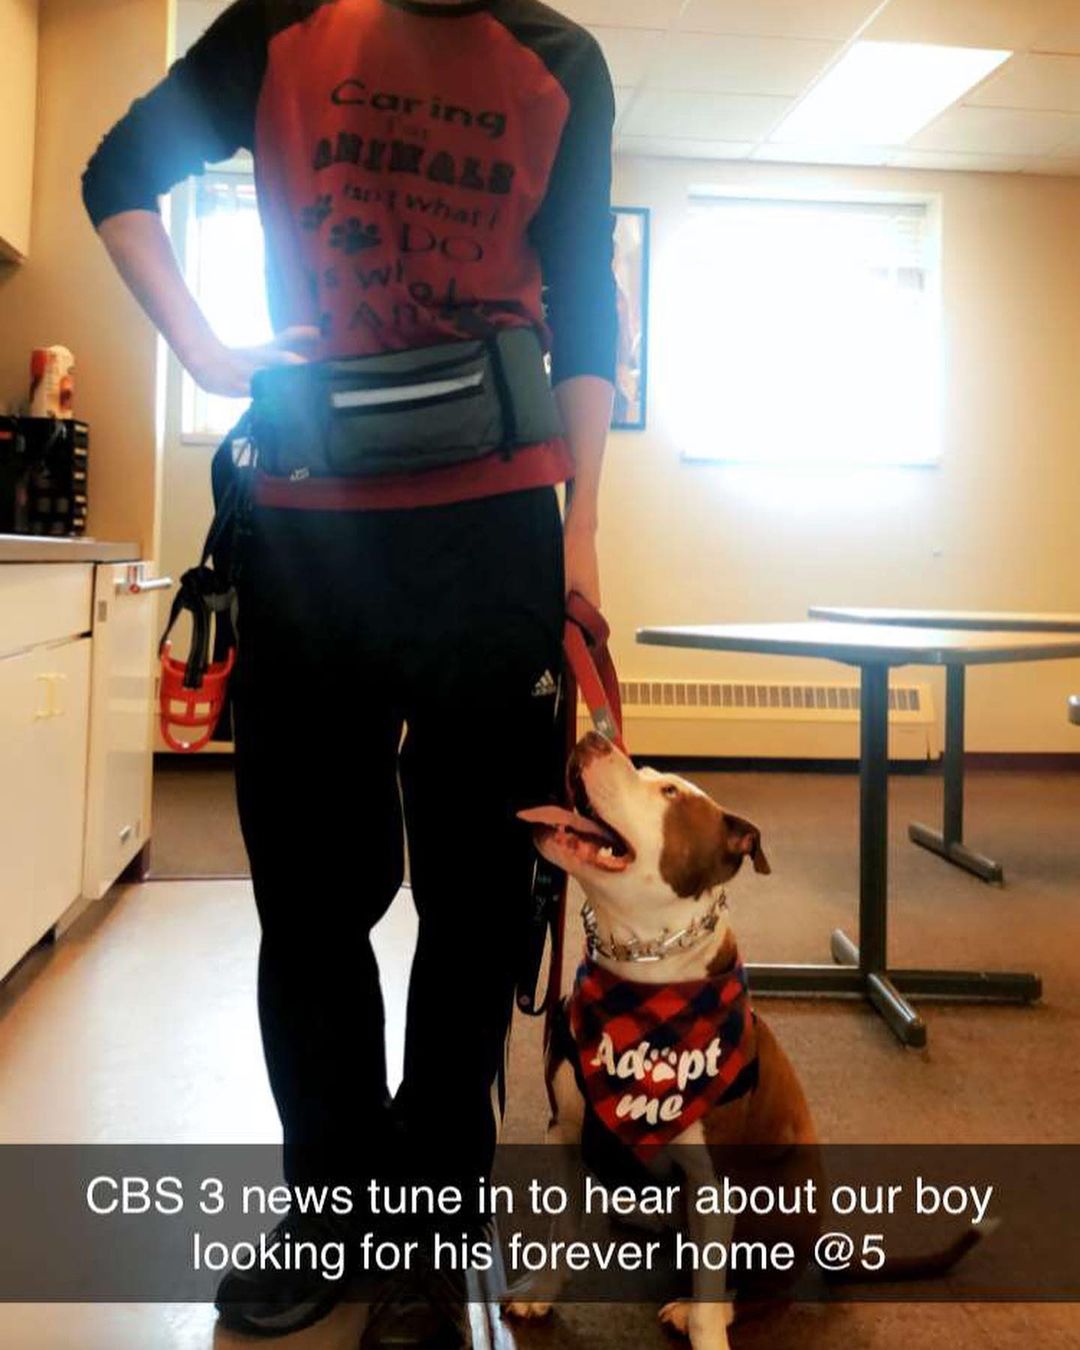 Mulligan enjoyed his visit to Duluth yesterday, & of course being the star of the show on @cbs3duluth didn’t hurt either! 😉
.
.
.
<a target='_blank' href='https://www.instagram.com/explore/tags/RangeRescue/'>#RangeRescue</a> <a target='_blank' href='https://www.instagram.com/explore/tags/moviestar/'>#moviestar</a> <a target='_blank' href='https://www.instagram.com/explore/tags/pitbullsofinstagram/'>#pitbullsofinstagram</a>